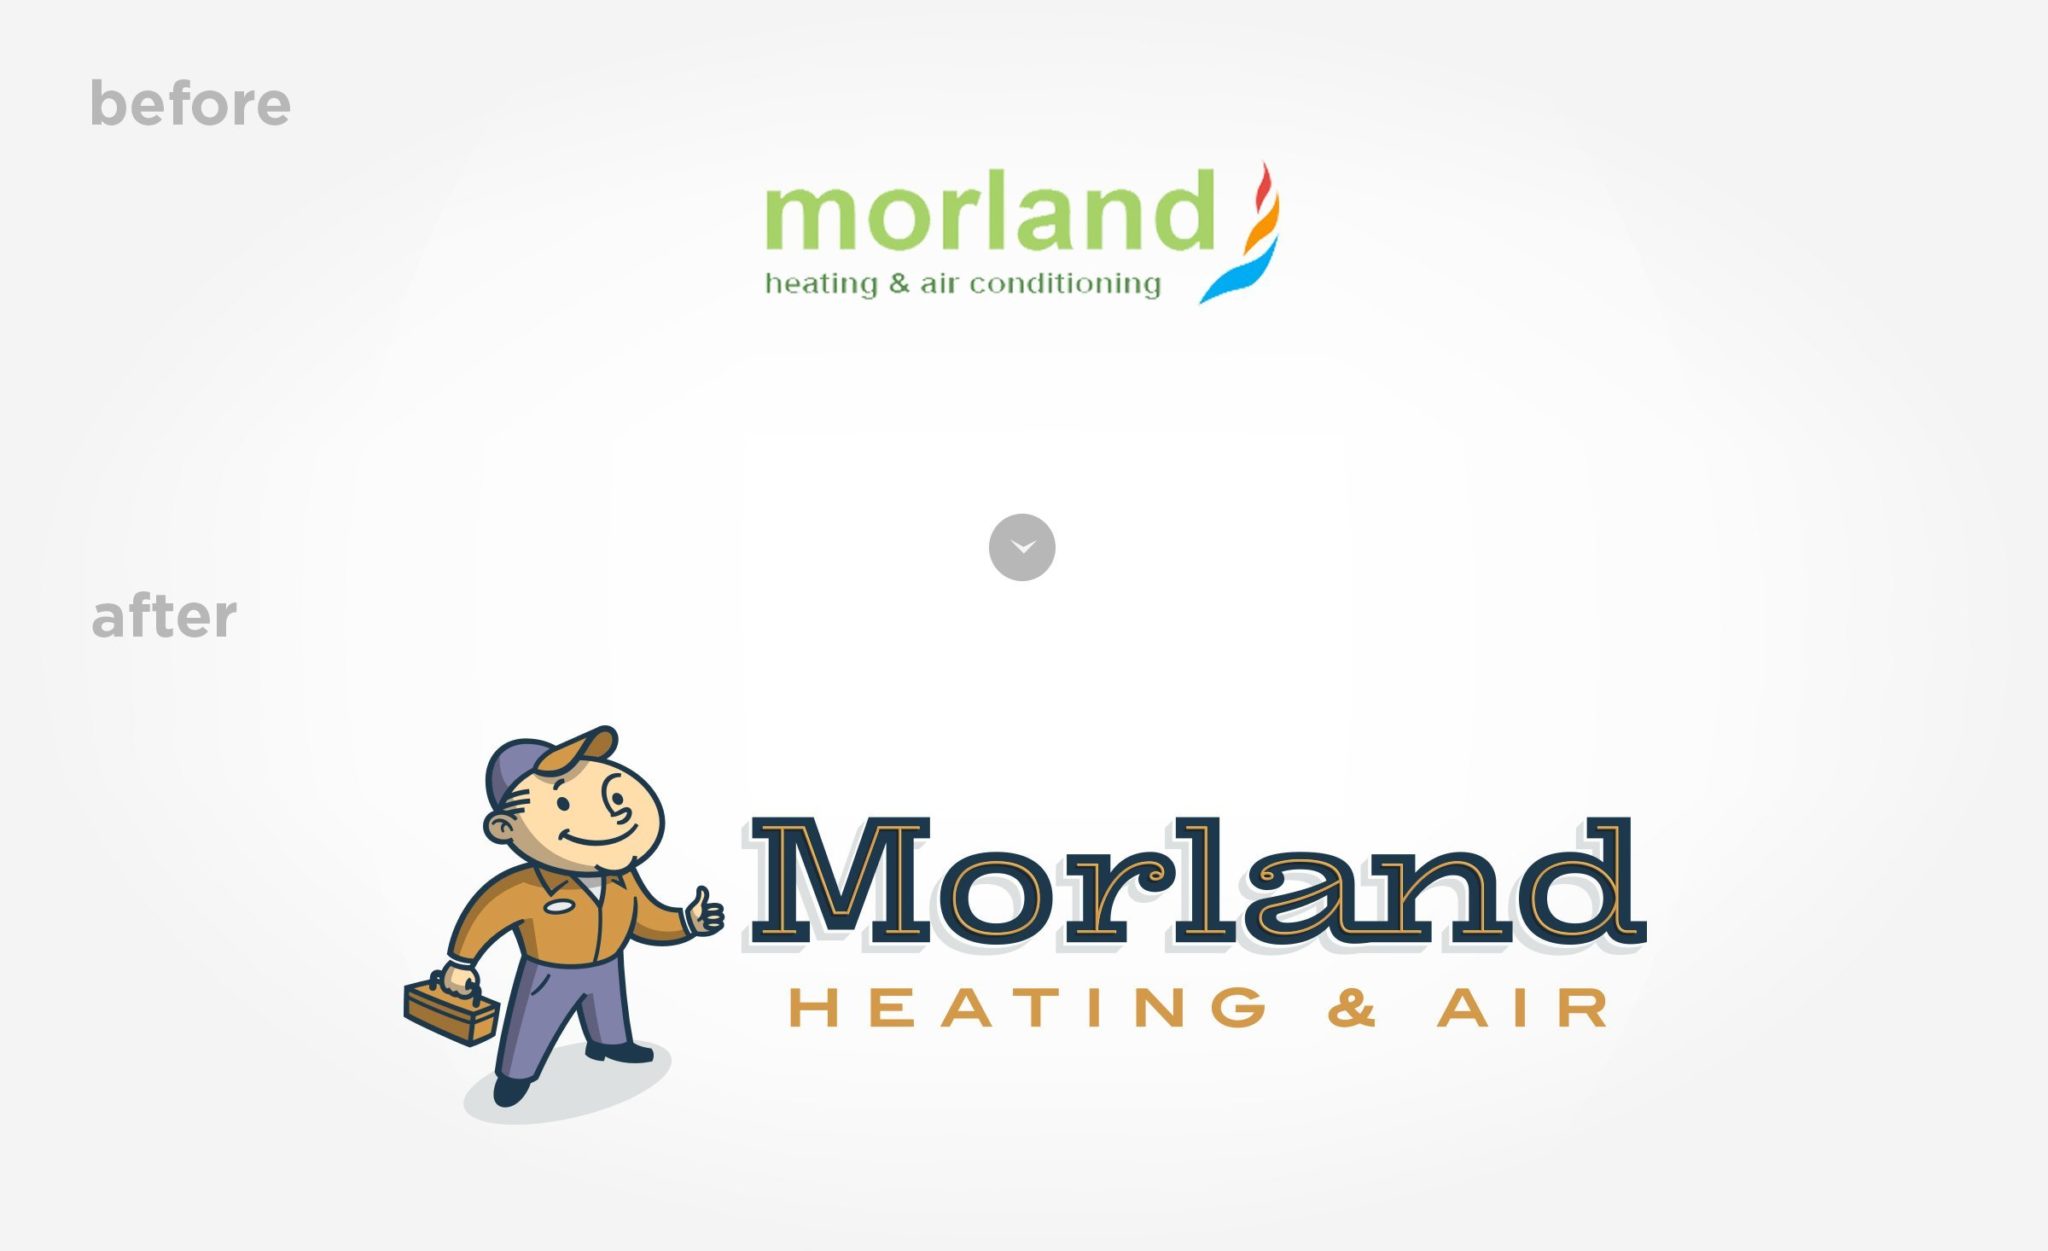 Before & after logo re-design for Morland Heating & Air.